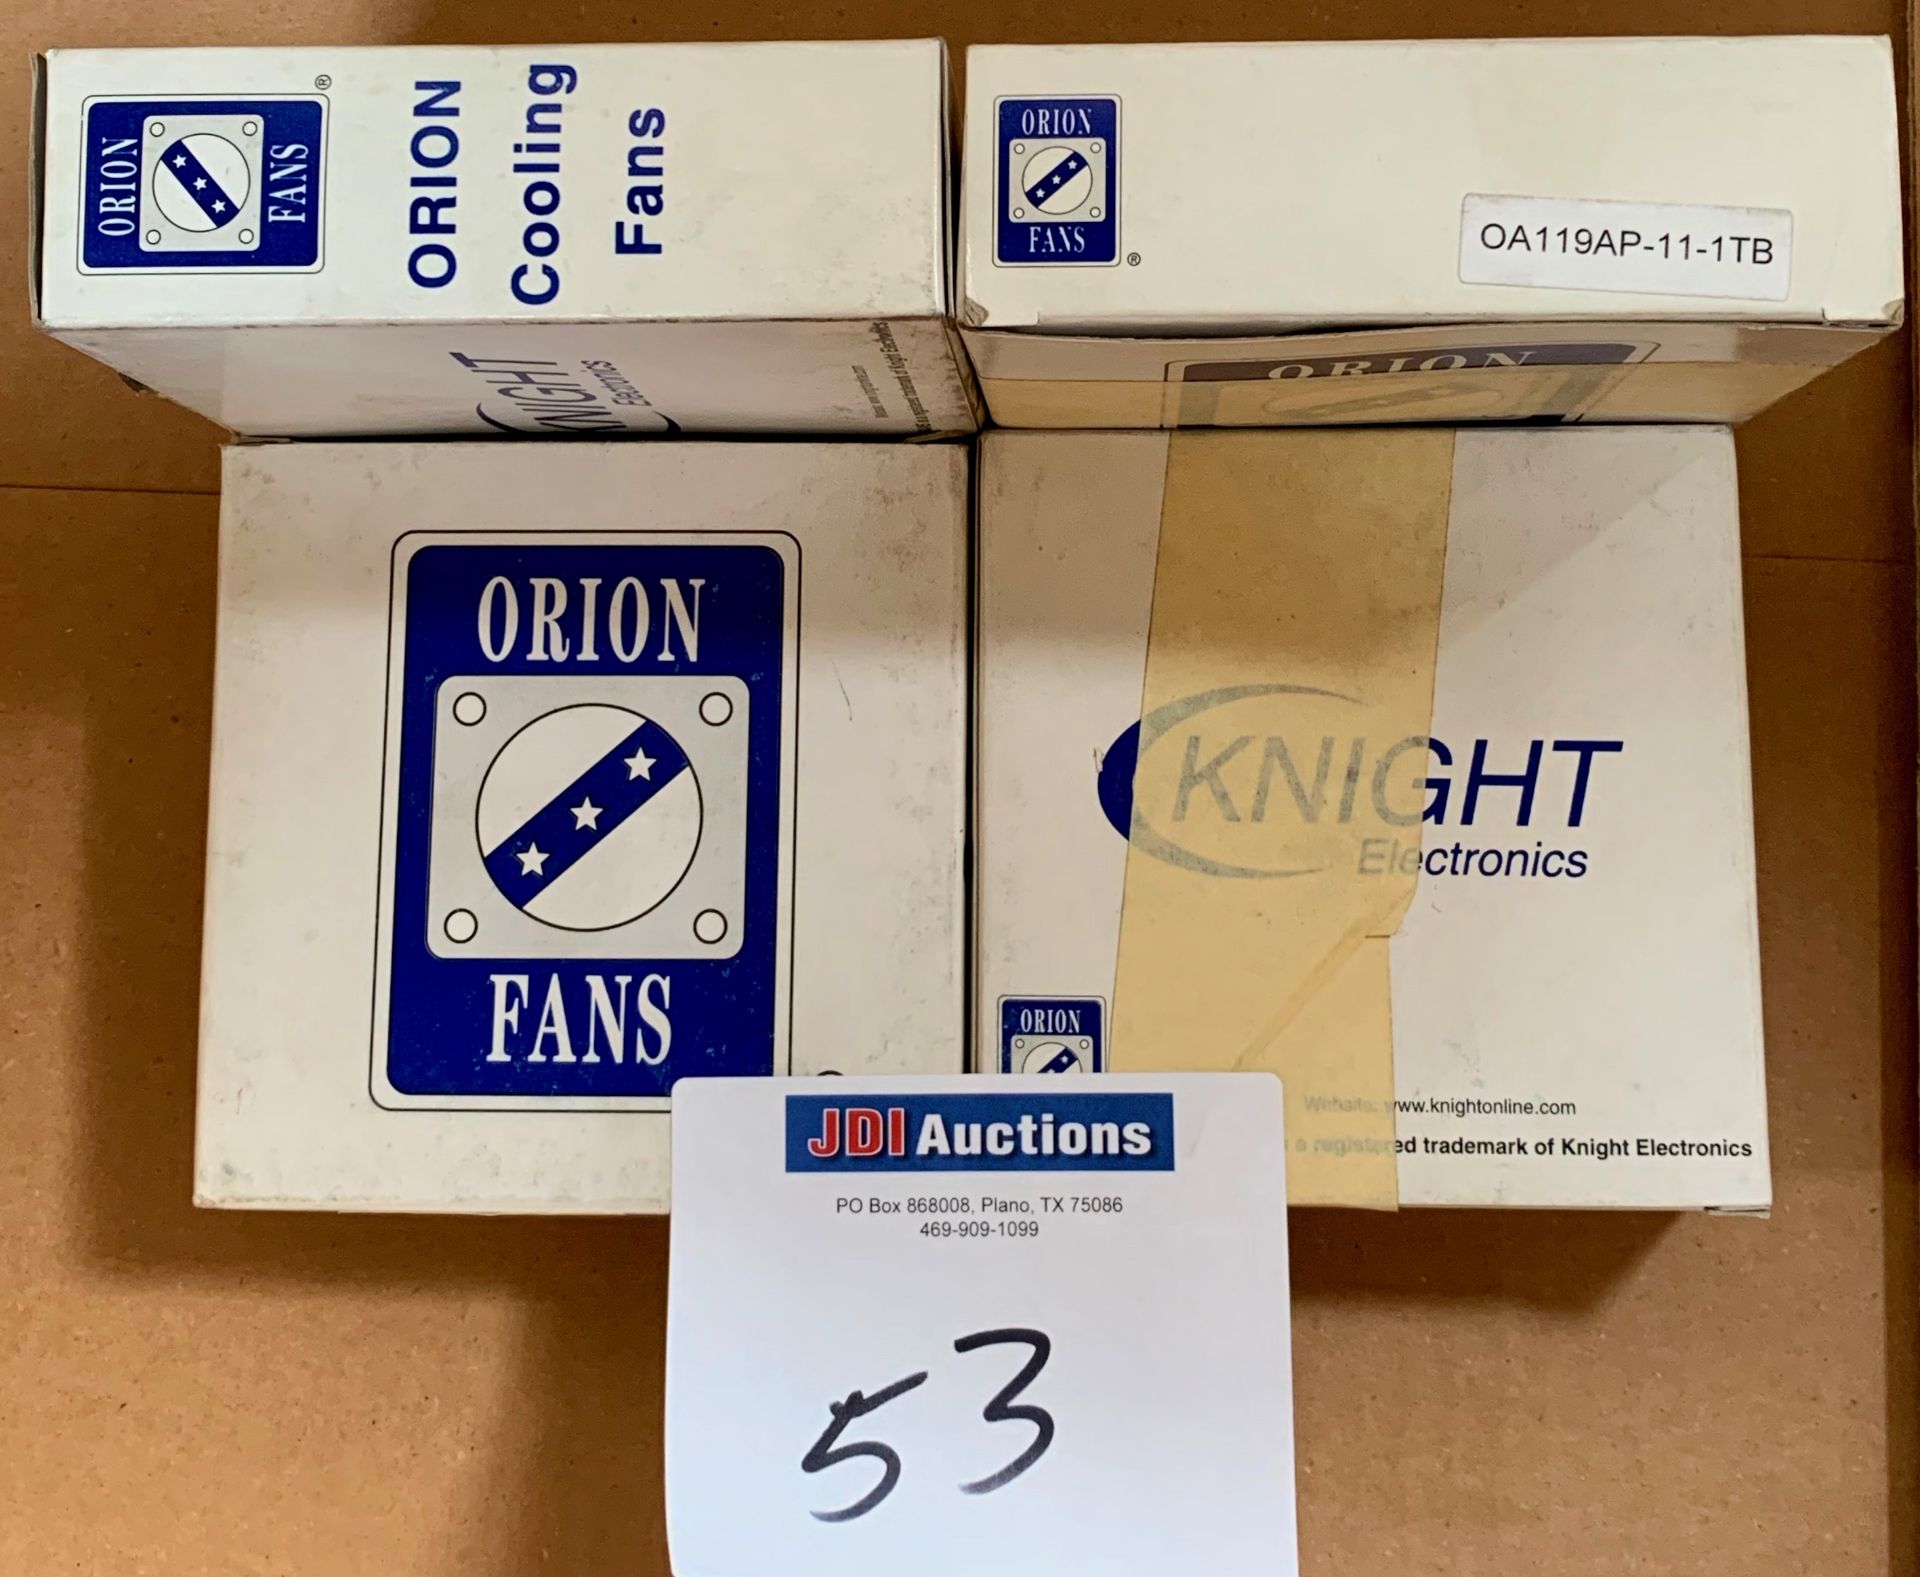 (4) Knight Electronics Orion Fans Model OA119AP-11-1TB Cooling Fans - new, never used - Qty. 4